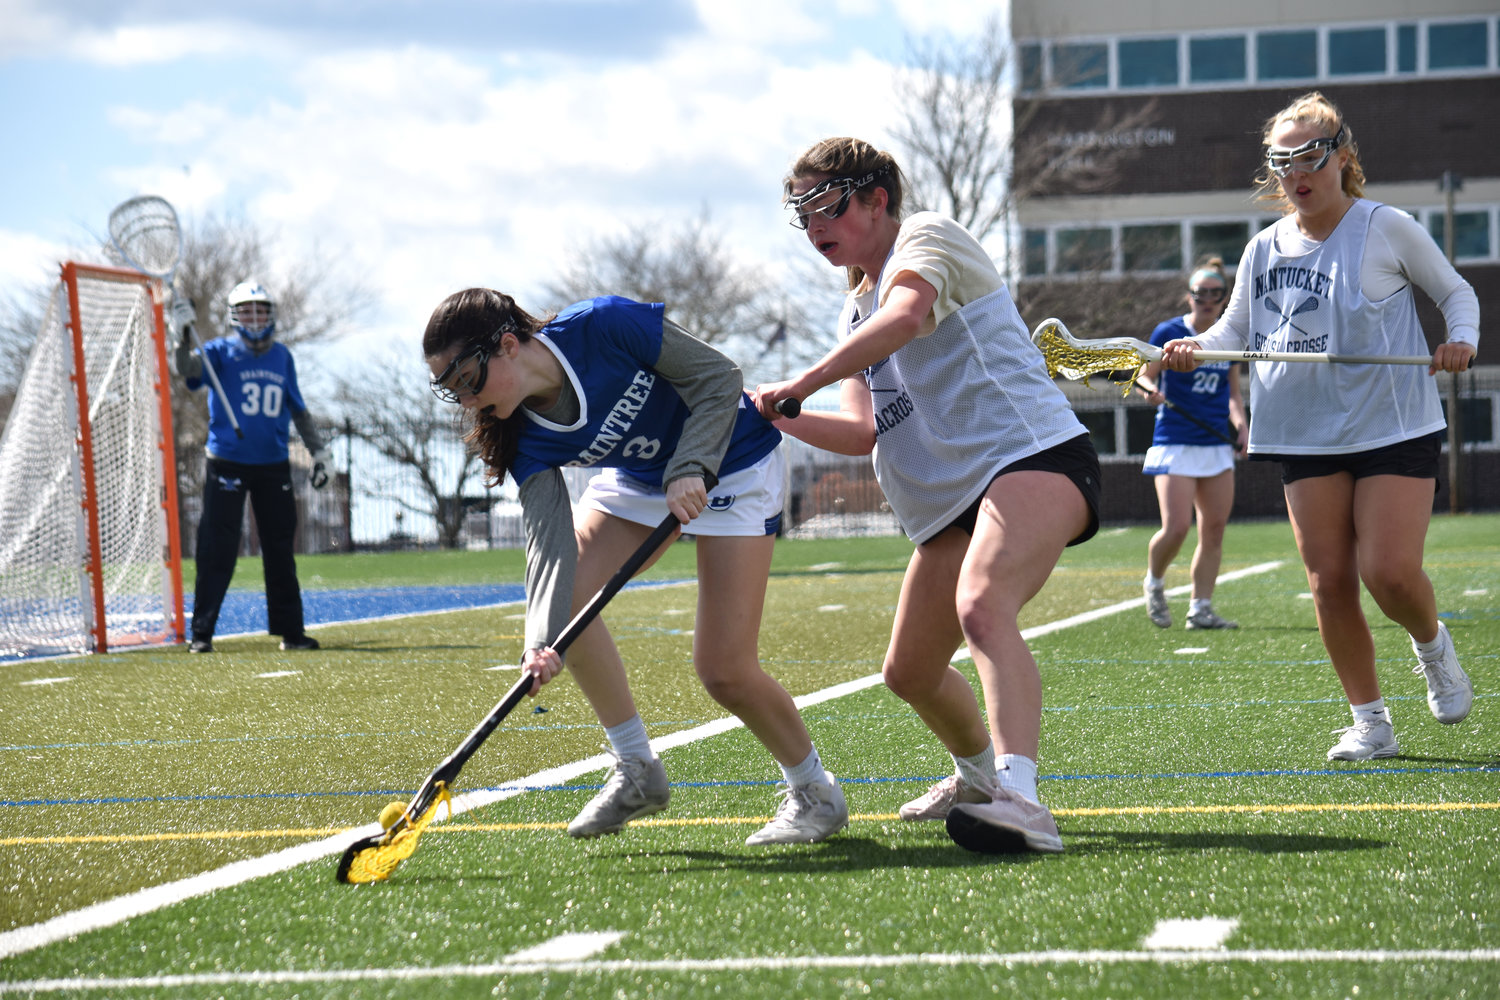 Aille Sweeney and a Braintree player battle for a ground ball.